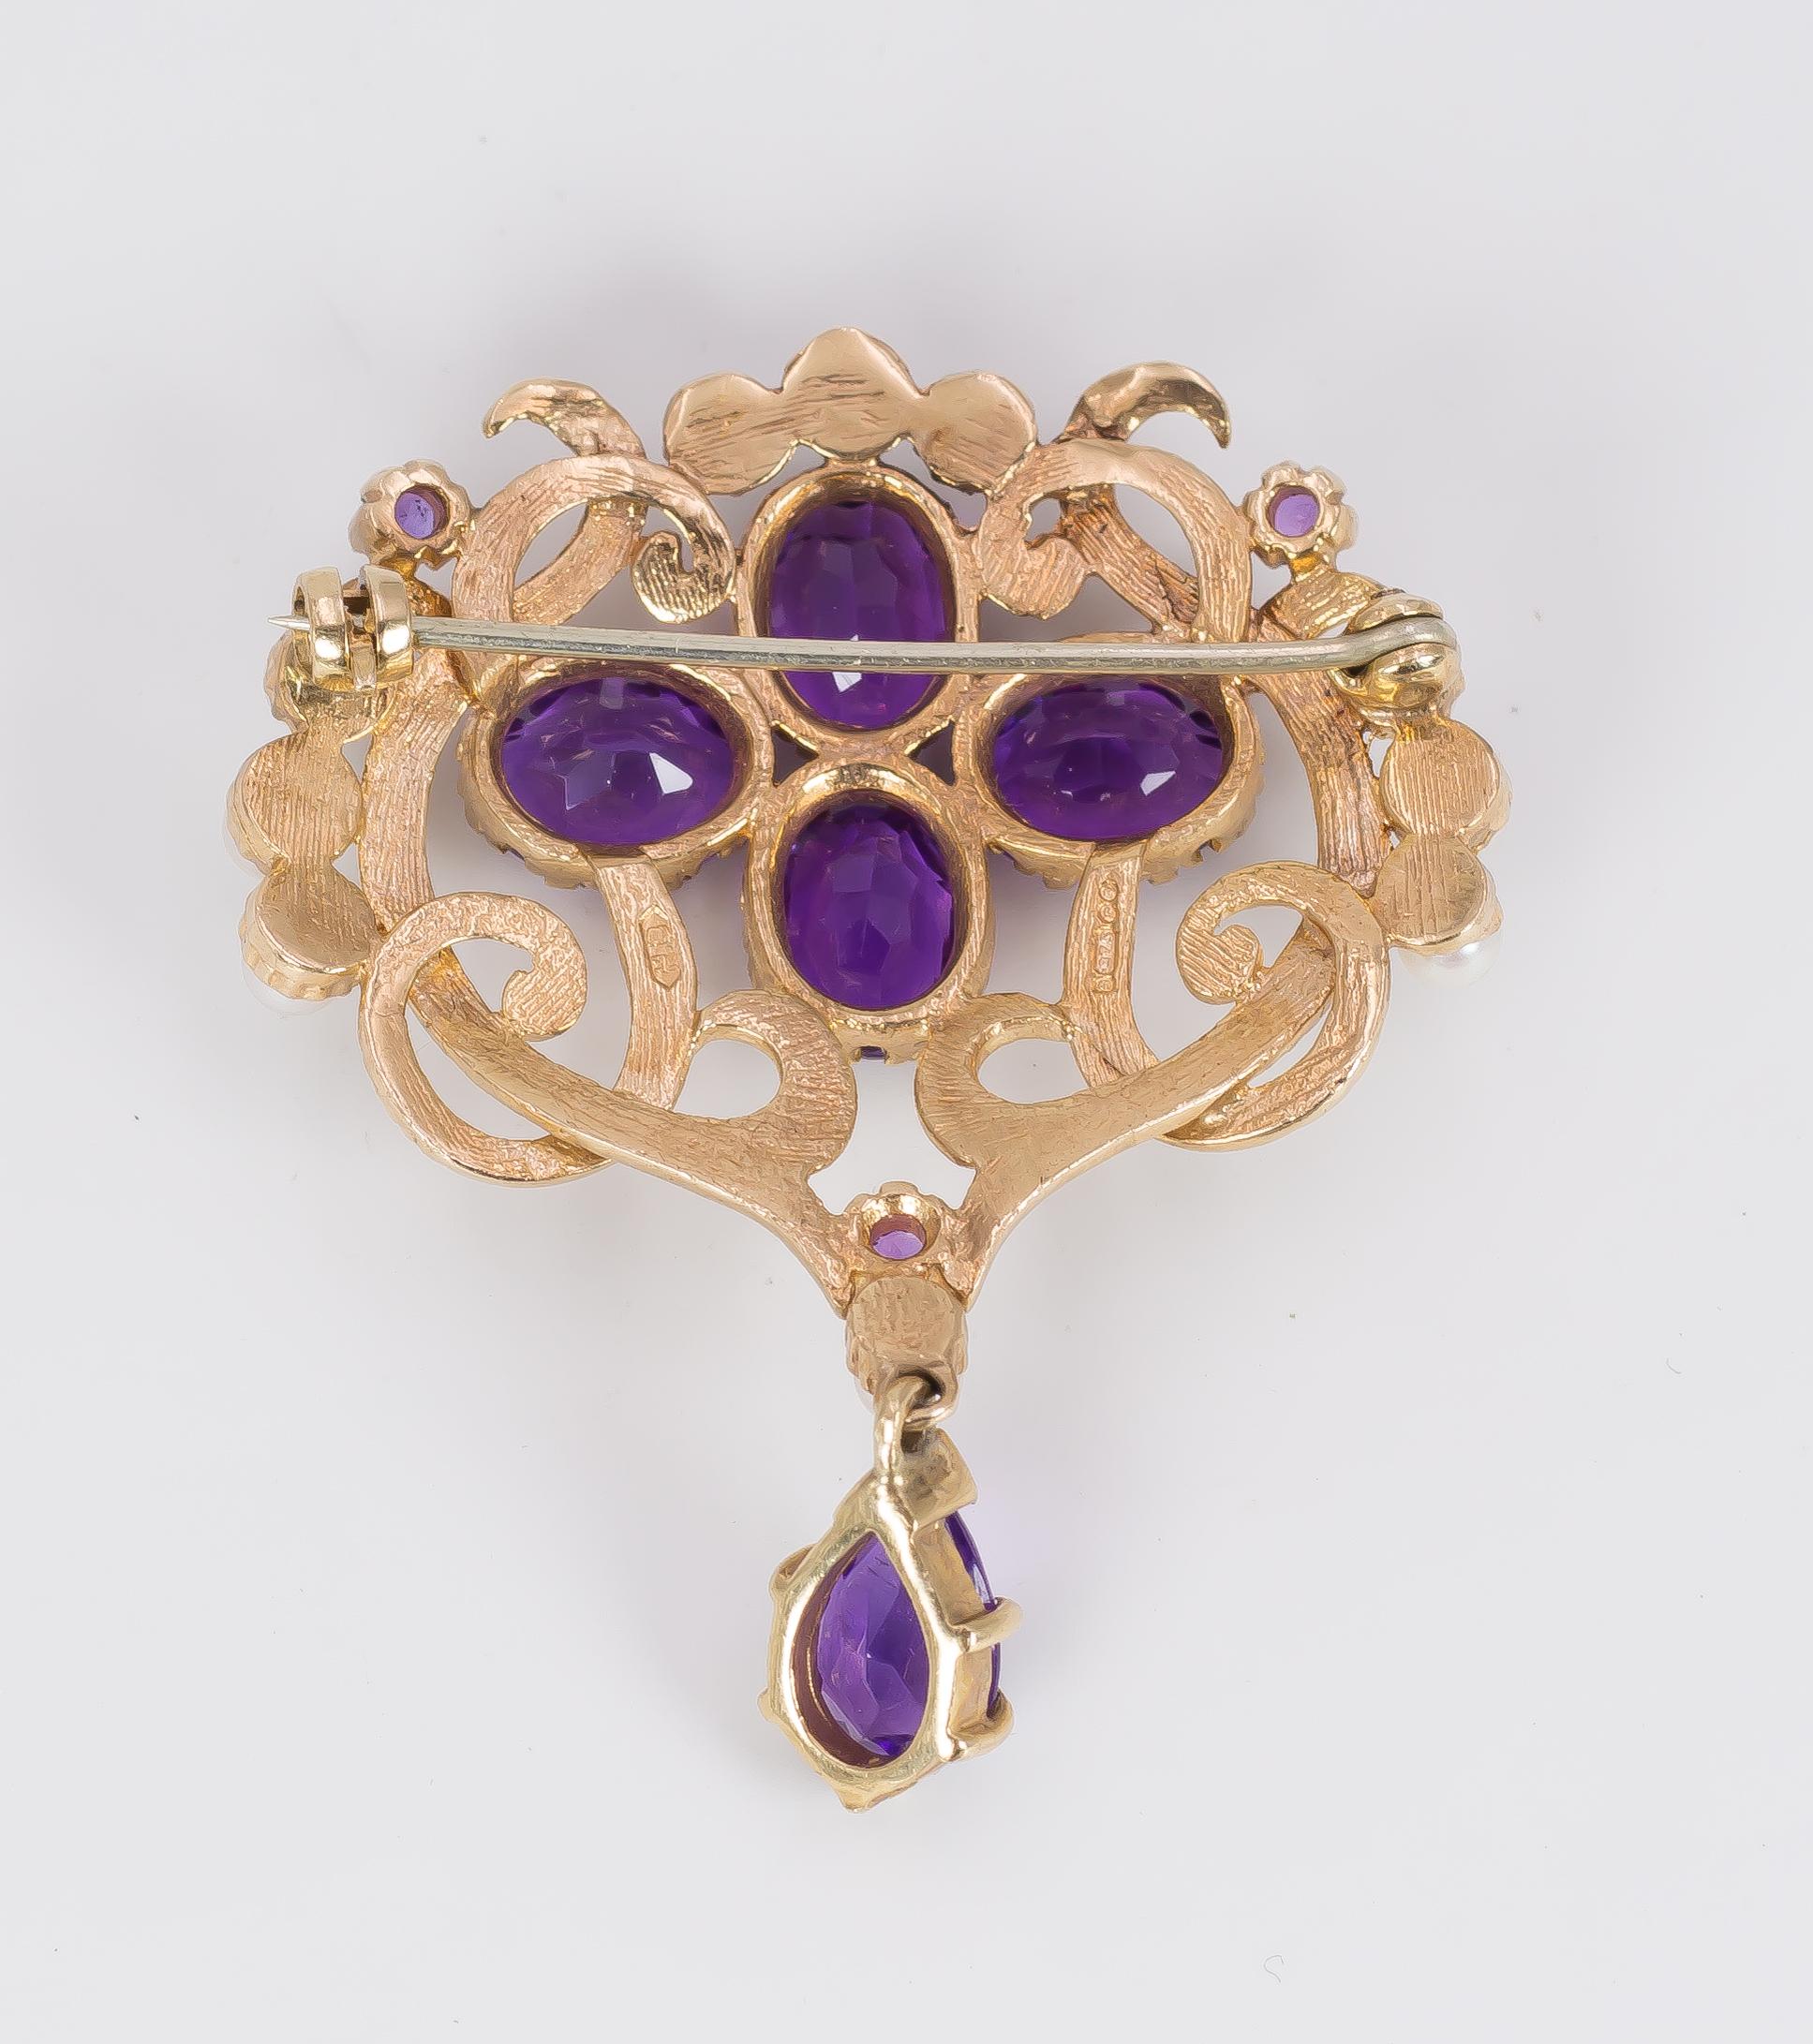 Women's Antique 9 Karat Gold, Amethyst and Bead Brooch, Early 1900 For Sale